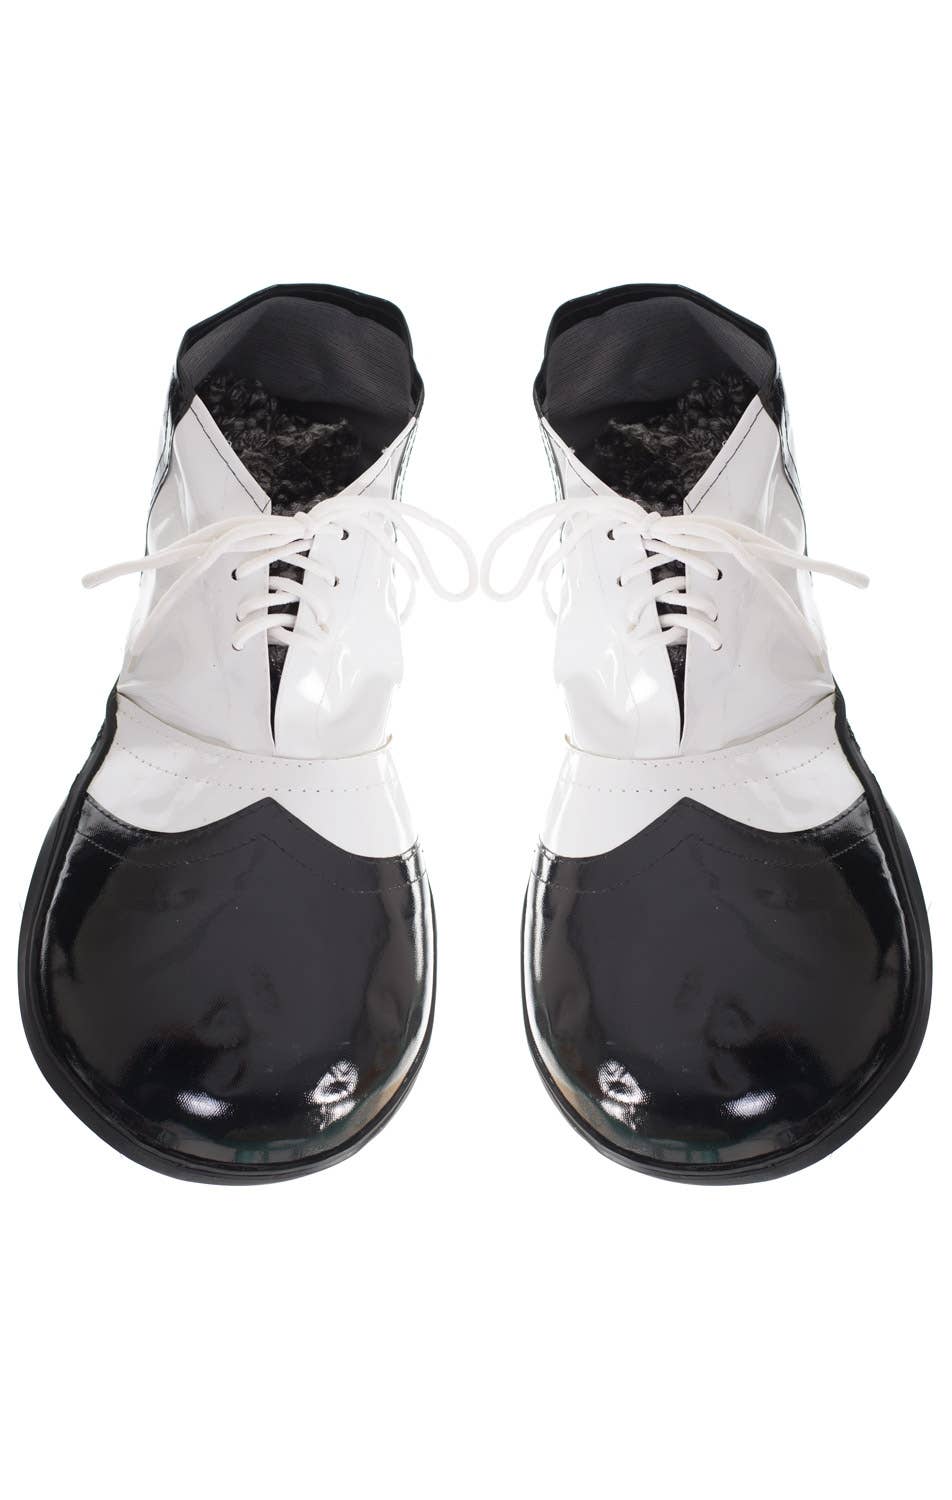 Jumbo Adult's Black And White Clown Shoes View 1